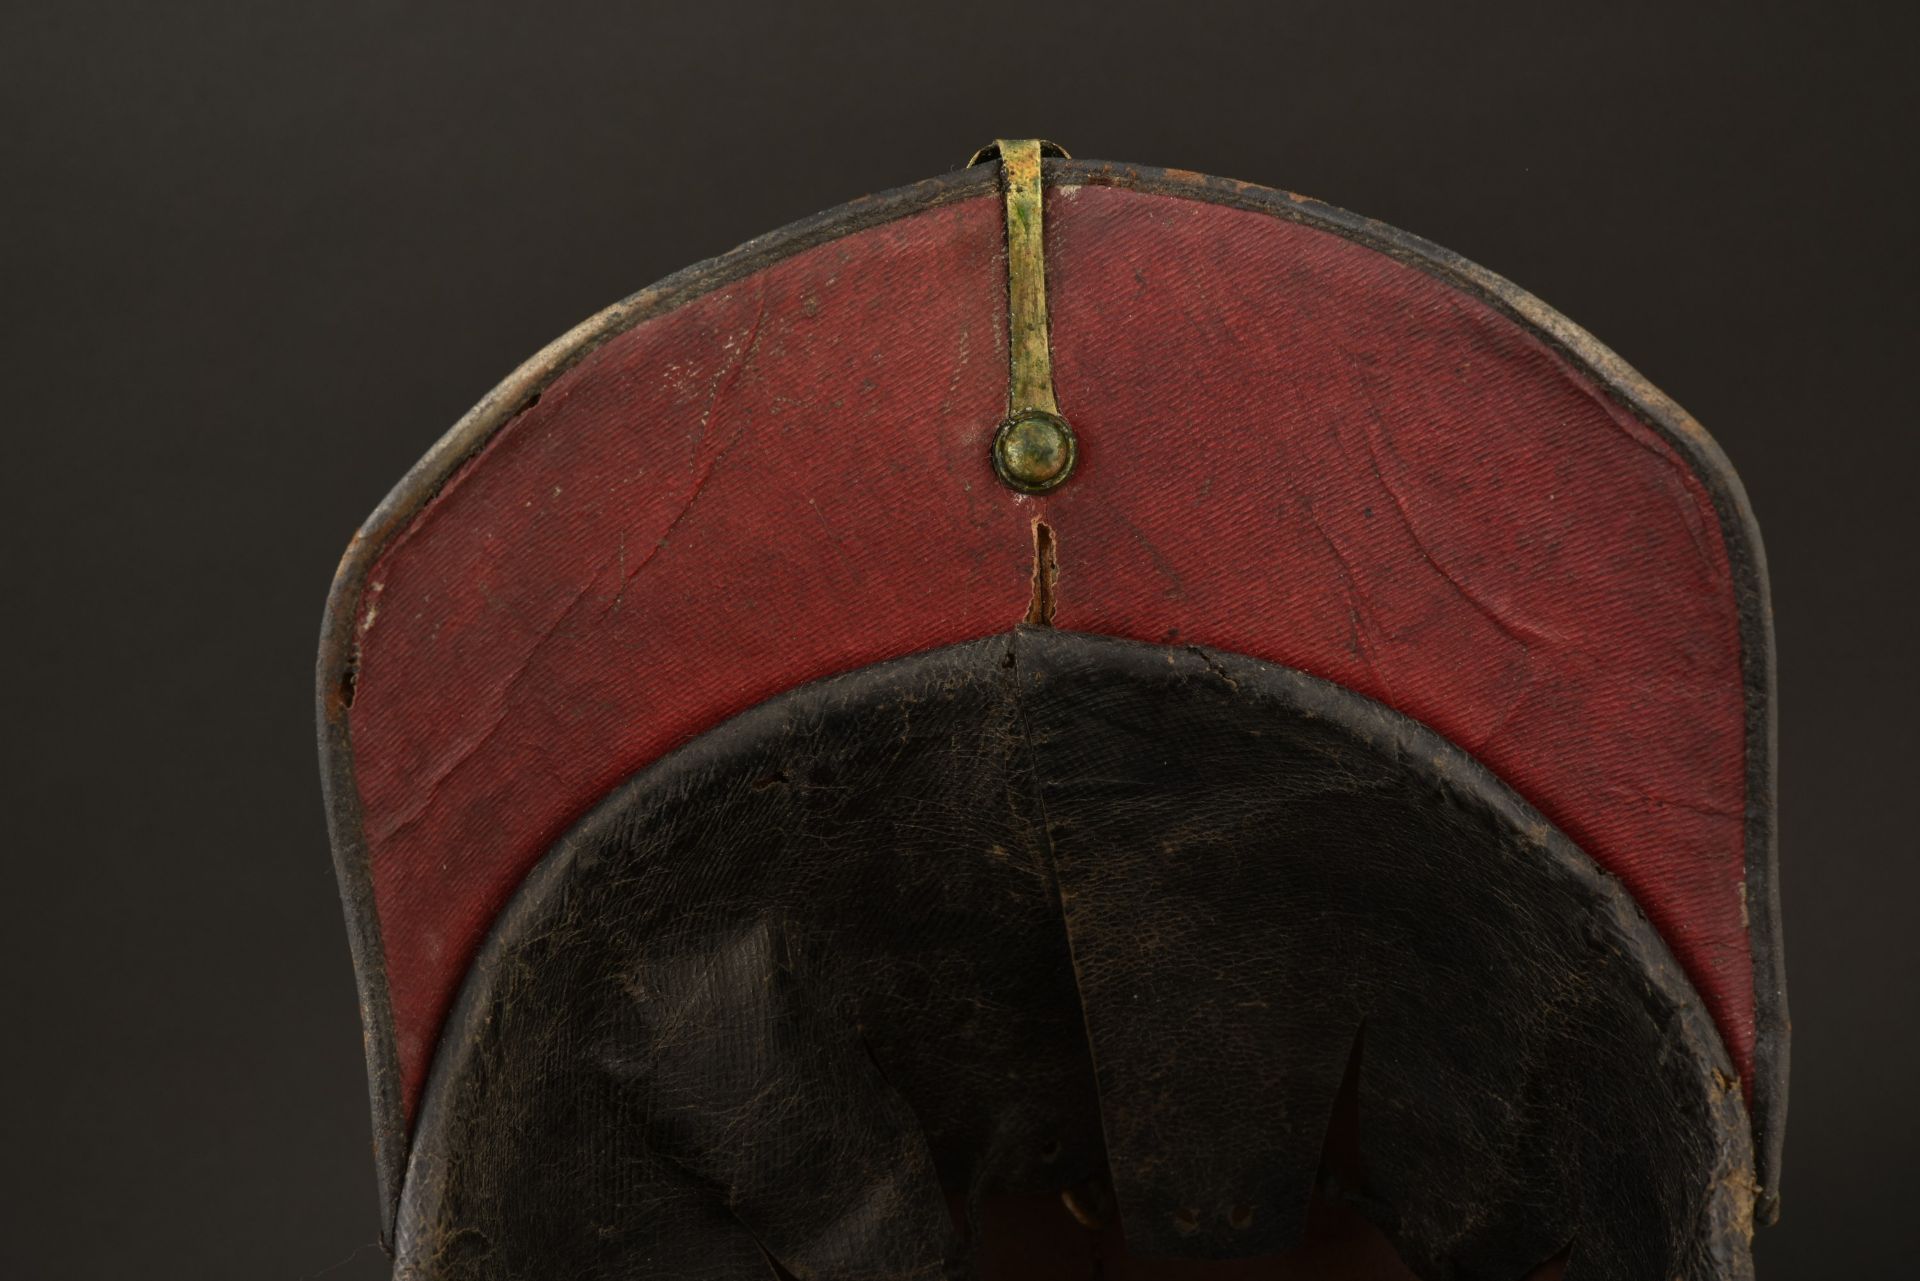 Casque a pointe d officier prussien 1842. Early prussian officer spiked helmet pattern 1842. Offizie - Image 2 of 4